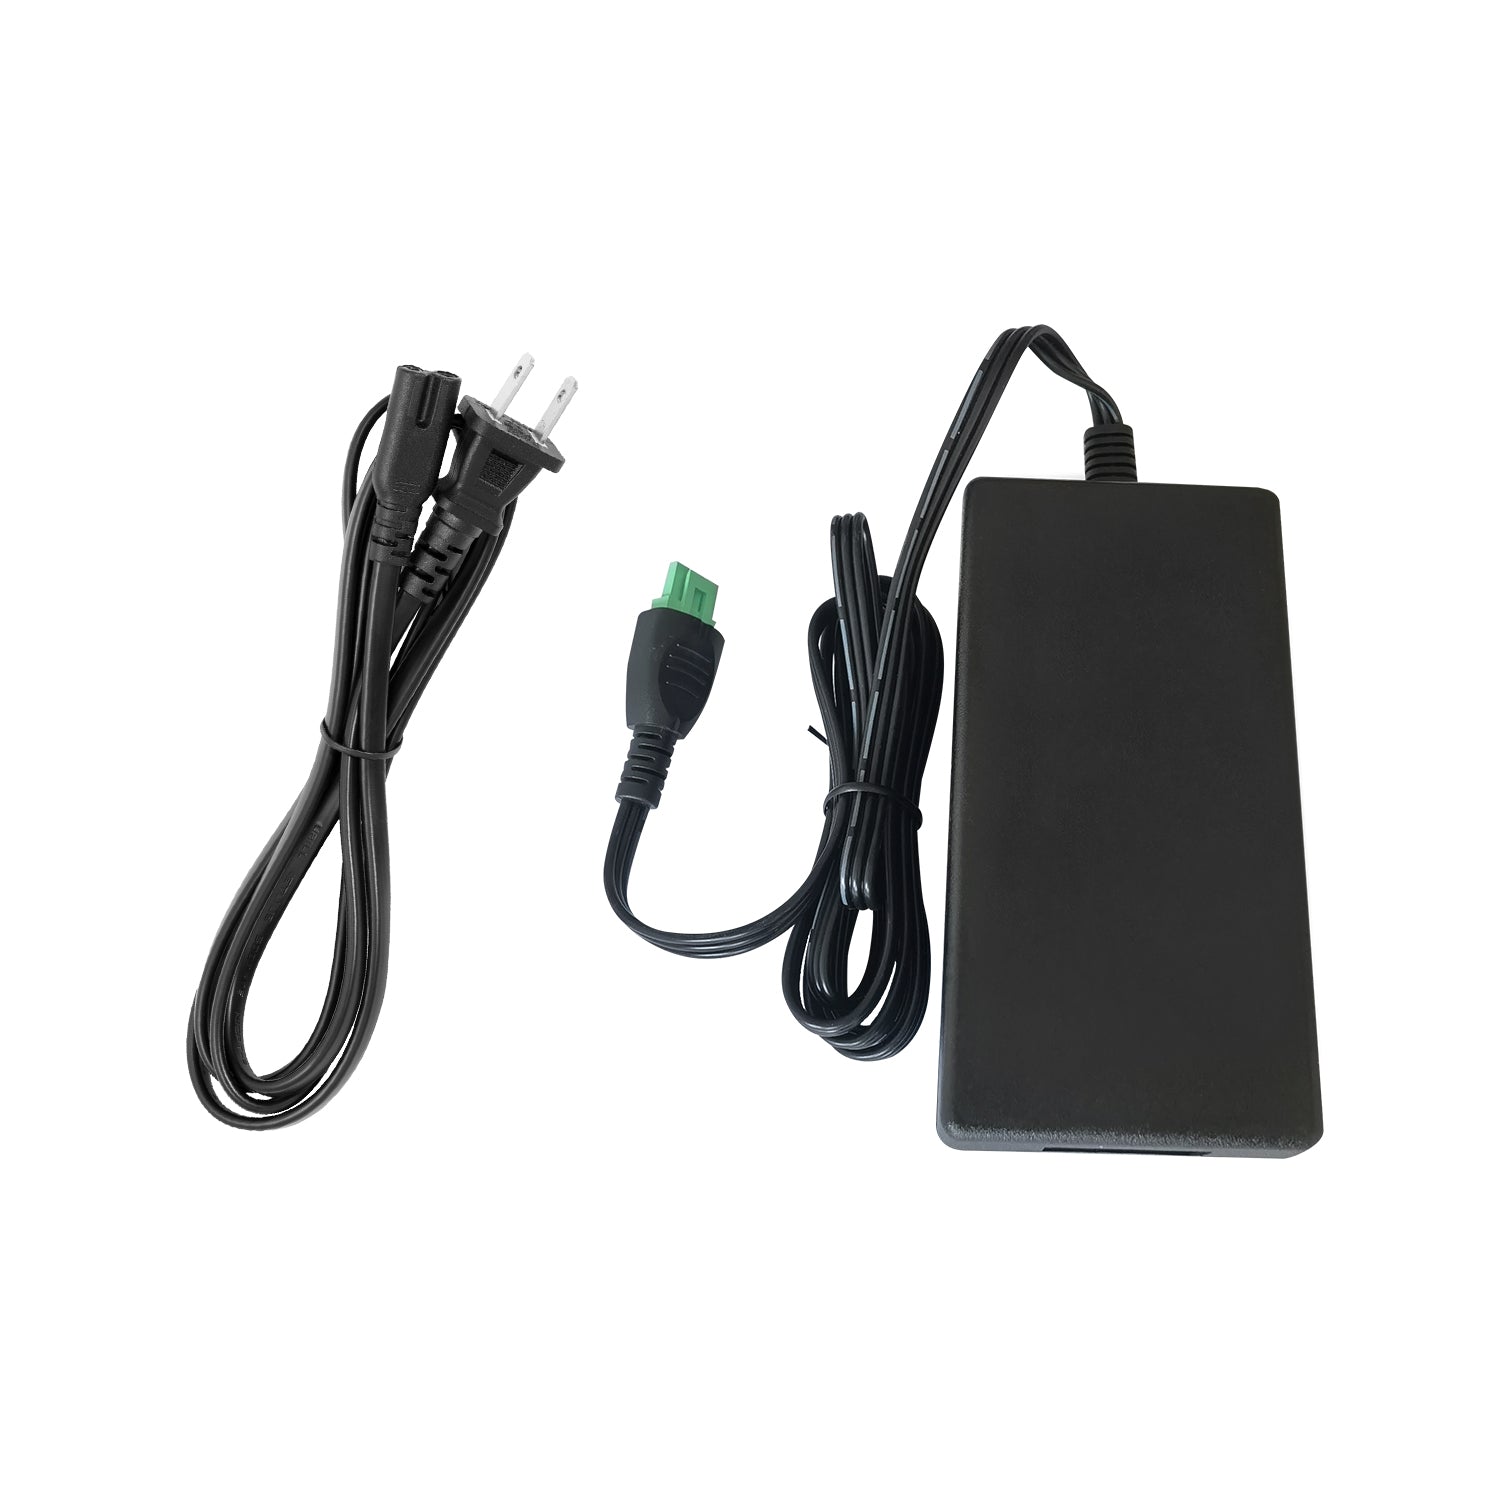 Power Adapter for HP Officejet 6700 All-in-One Printer.